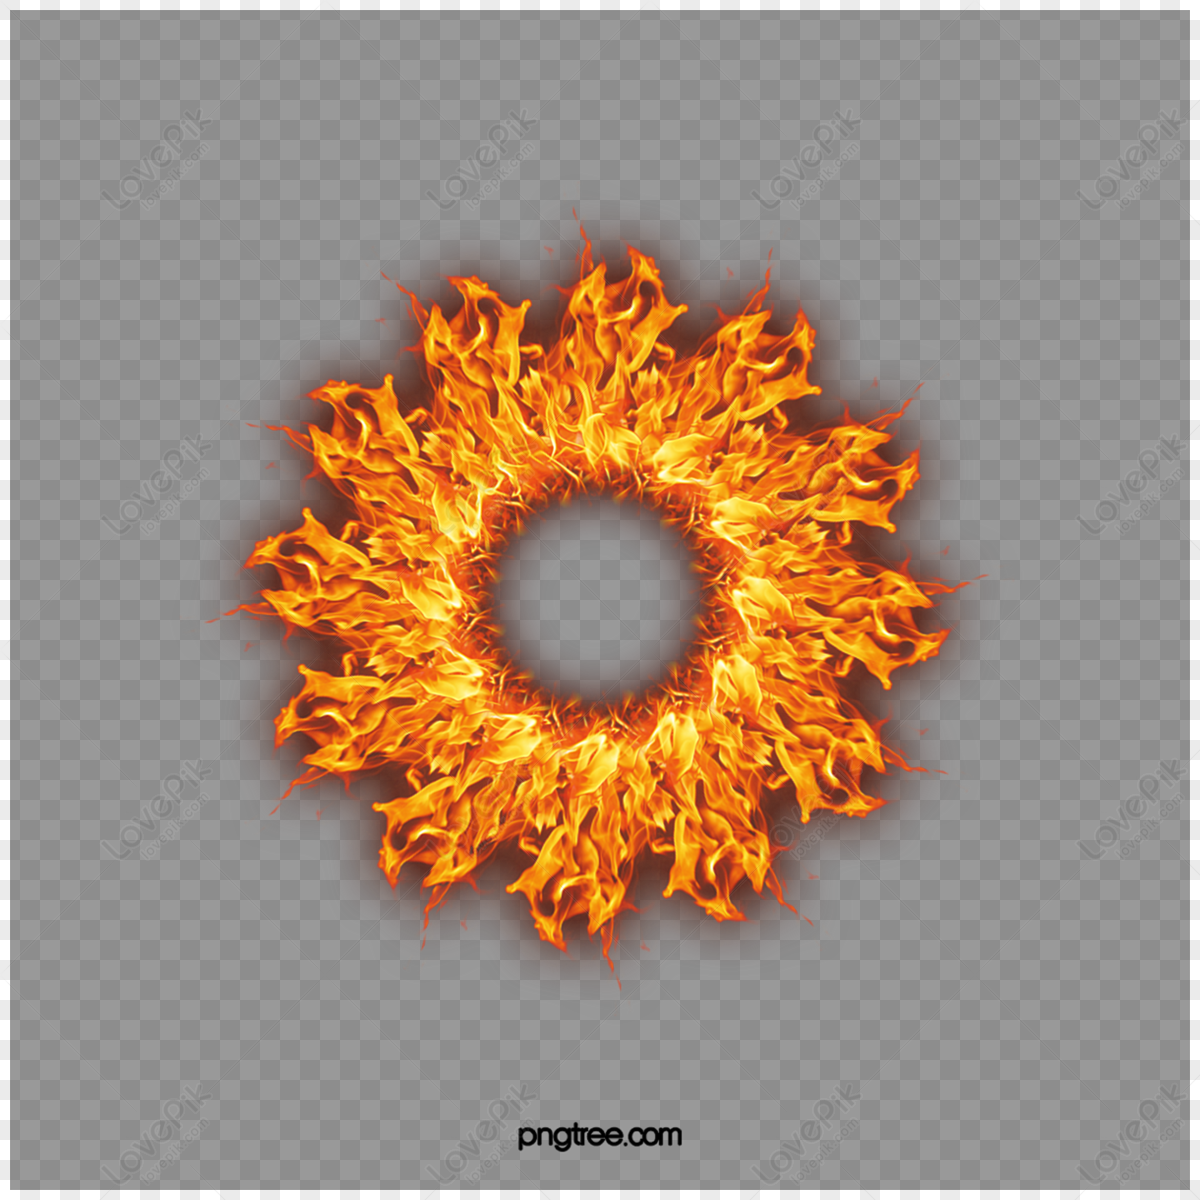 Fire Ring Images, HD Pictures For Free Vectors Download - Lovepik.com